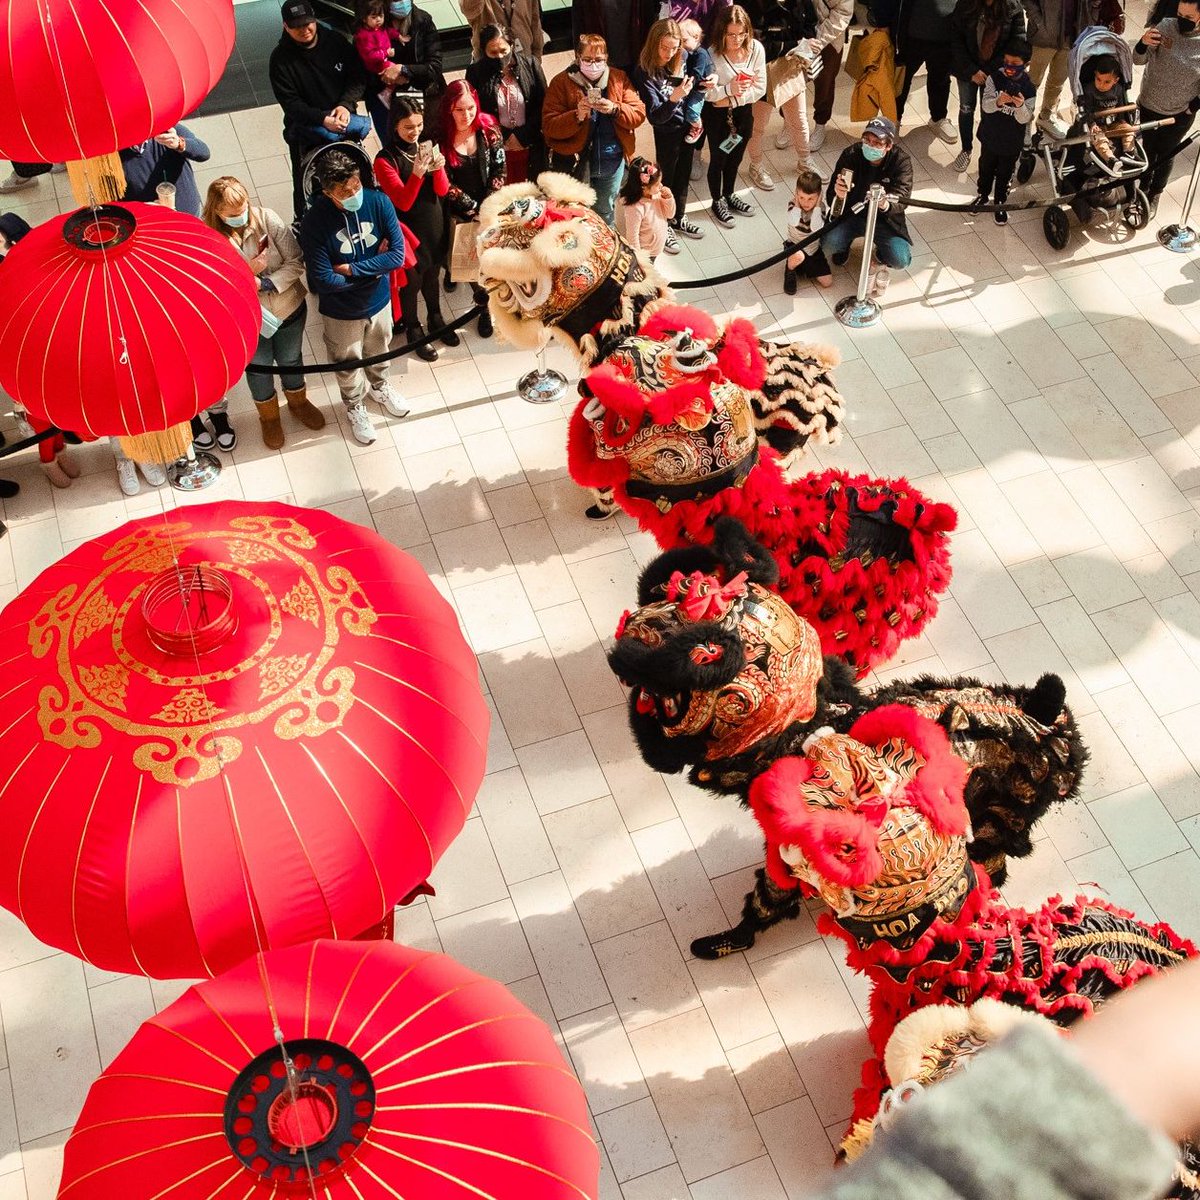 Bring good luck and fortune into your new year with a special performance by Hoa Đạo Lion Dance celebration the Lunar New Year! 🐲 ⁠The traditional HD Lion Dance performance will take place February 10th at 2pm on Level 1 near Sephora.